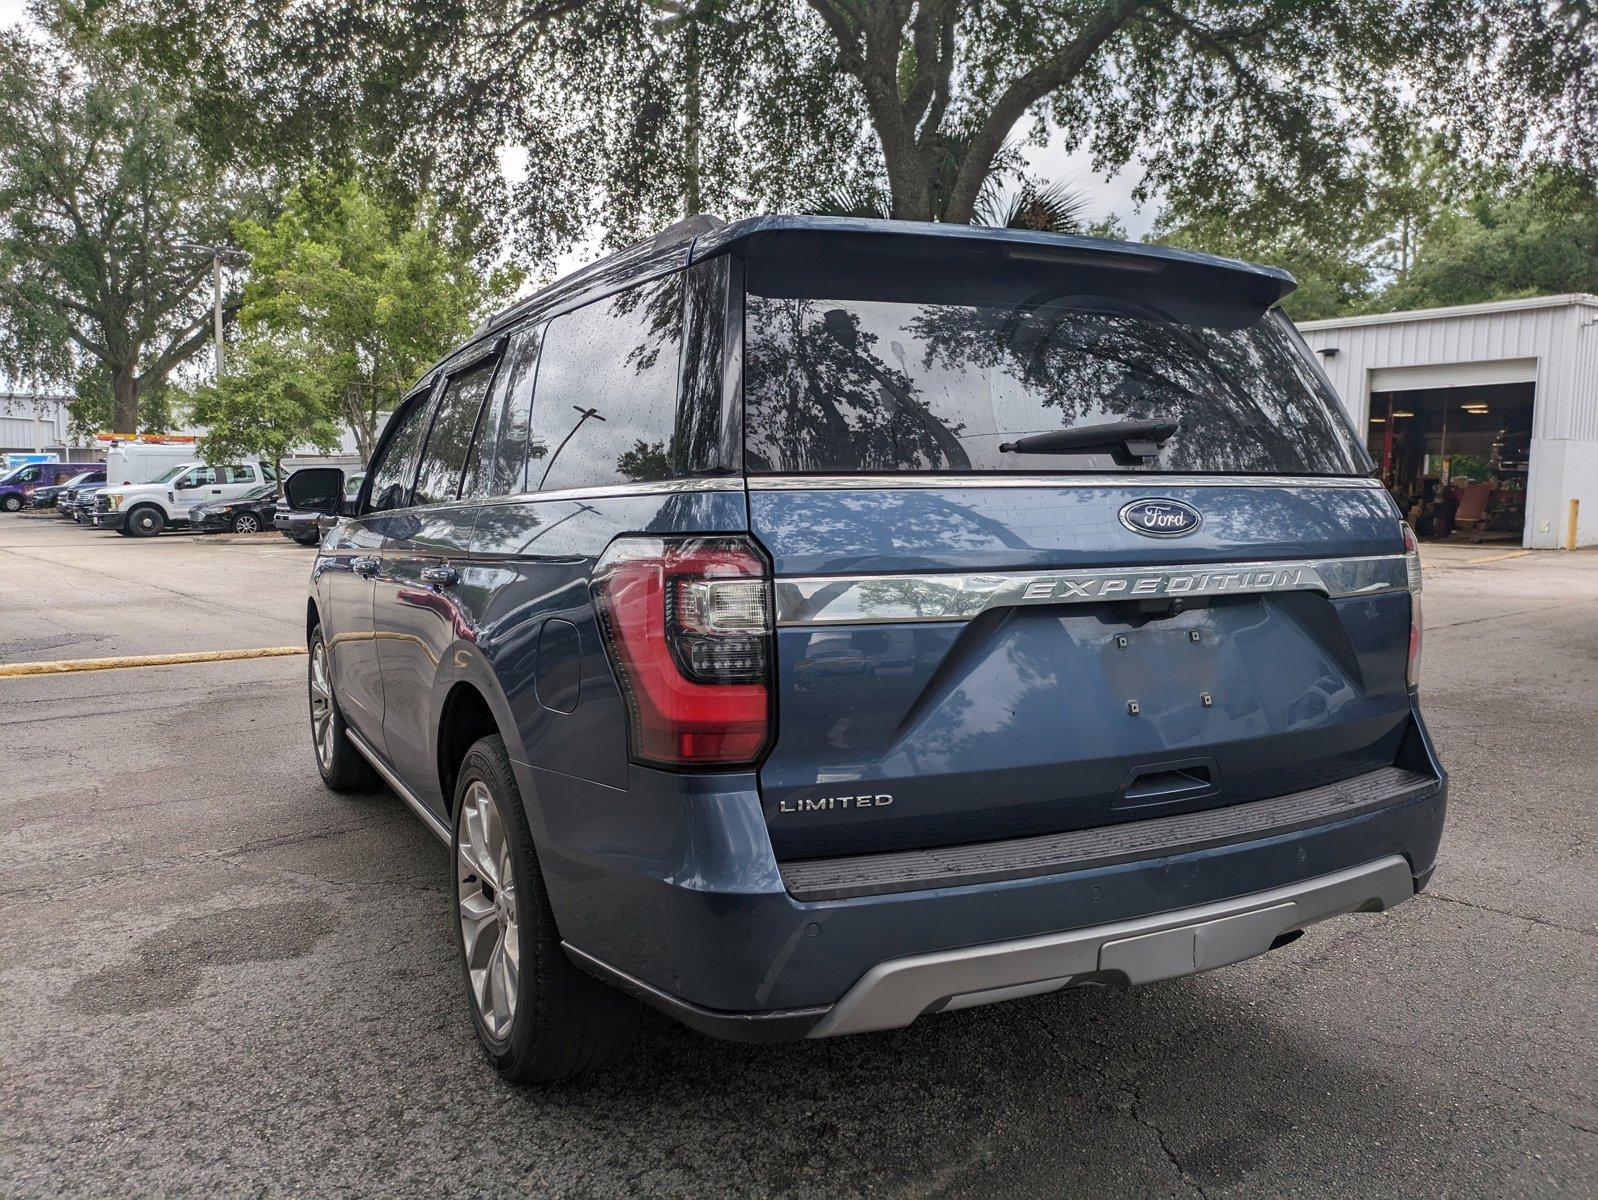 2019 Ford Expedition Vehicle Photo in Jacksonville, FL 32256